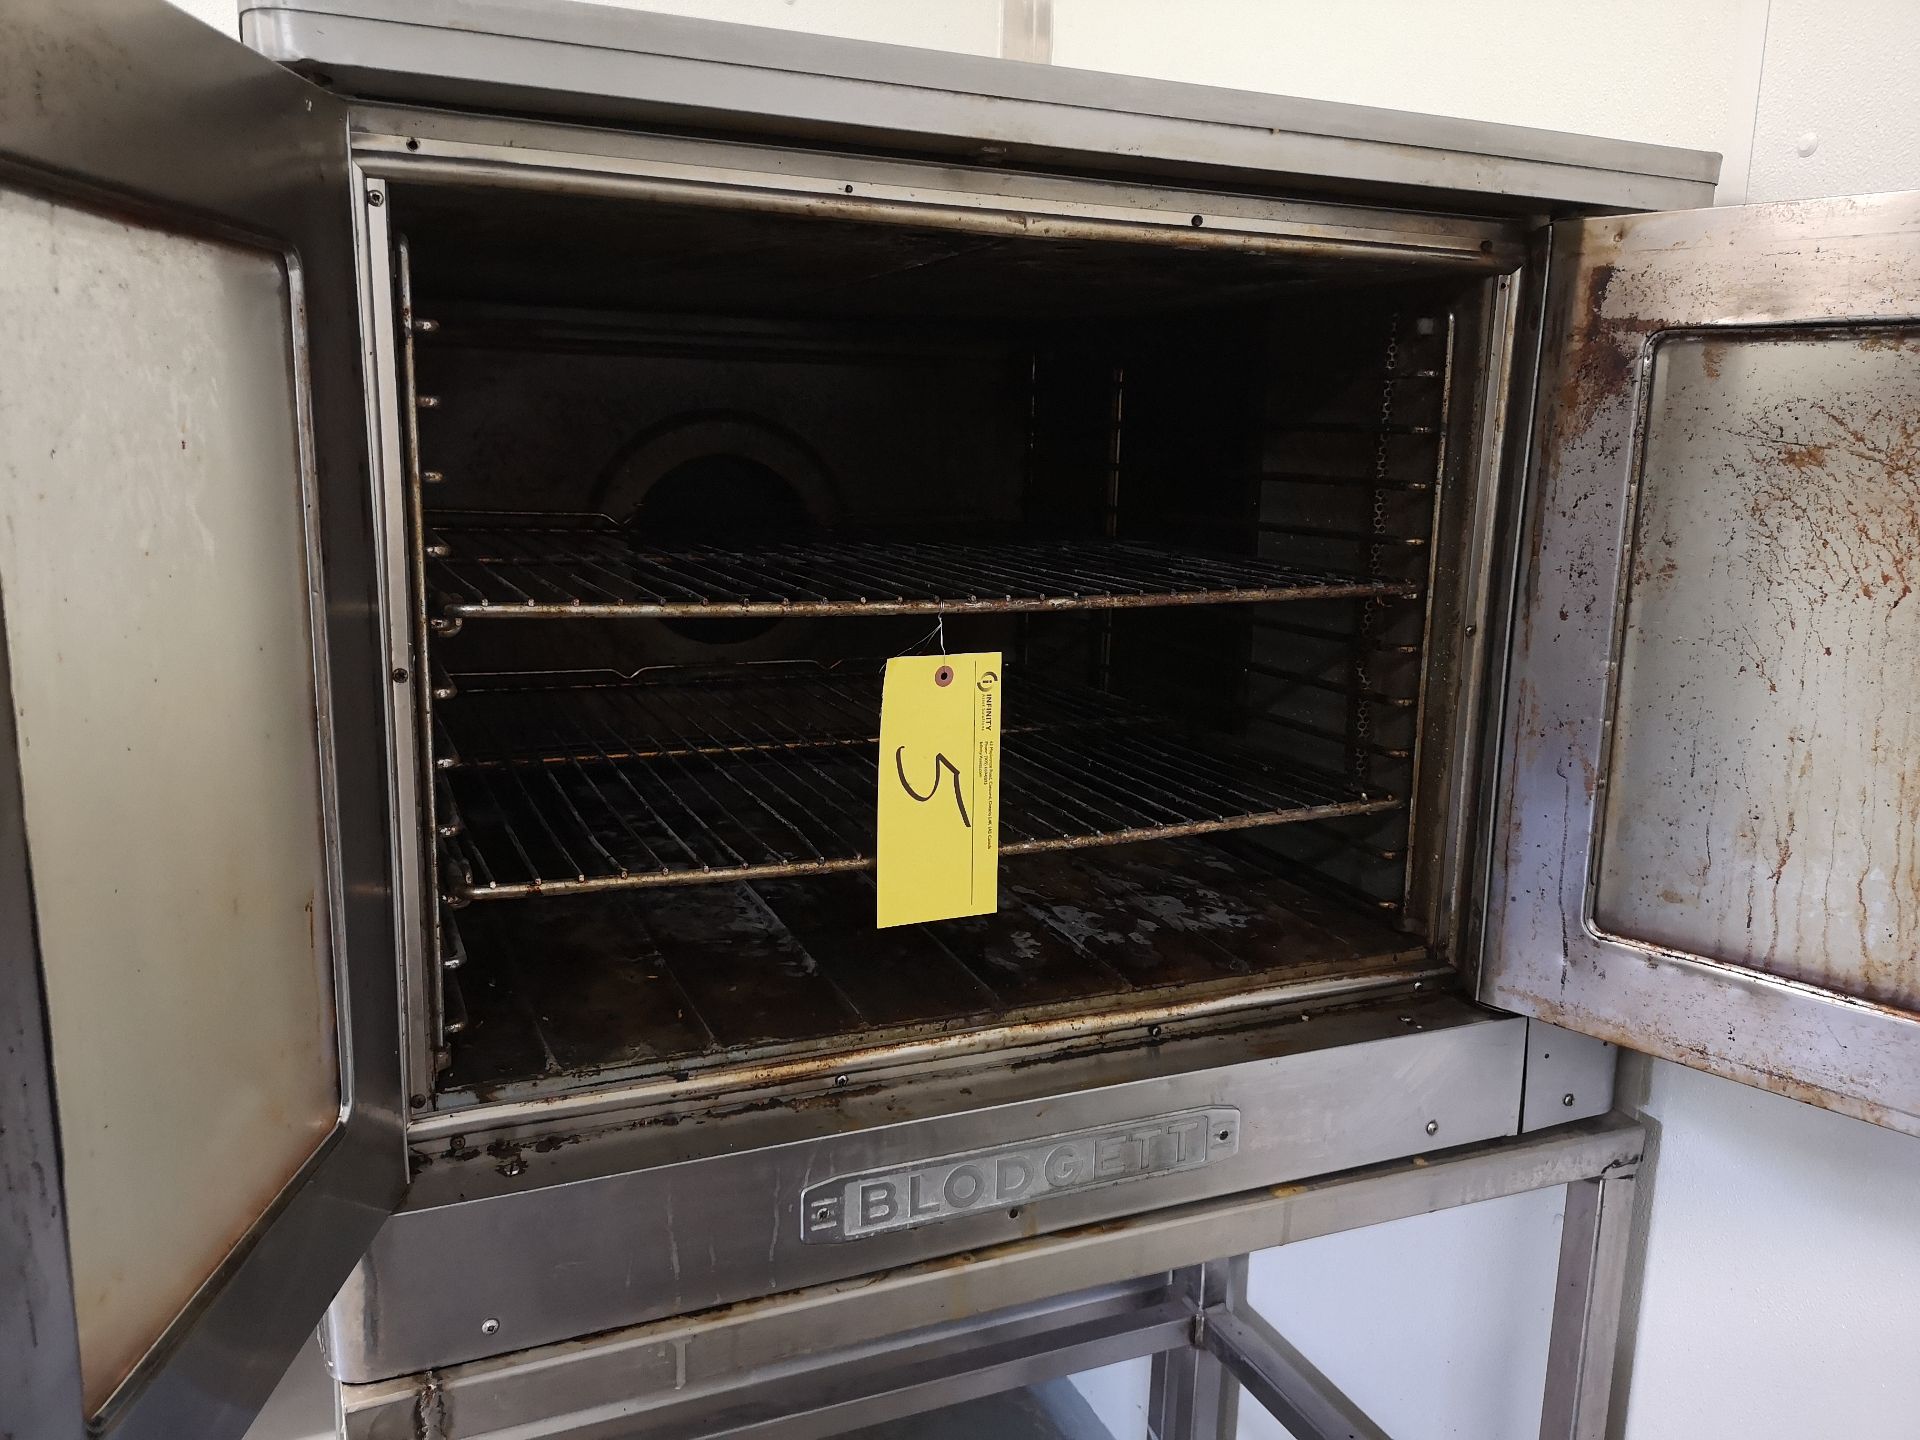 BLODGETT ELECTRIC CONVECTION OVEN, S/N 573EZE-5 - Image 2 of 4